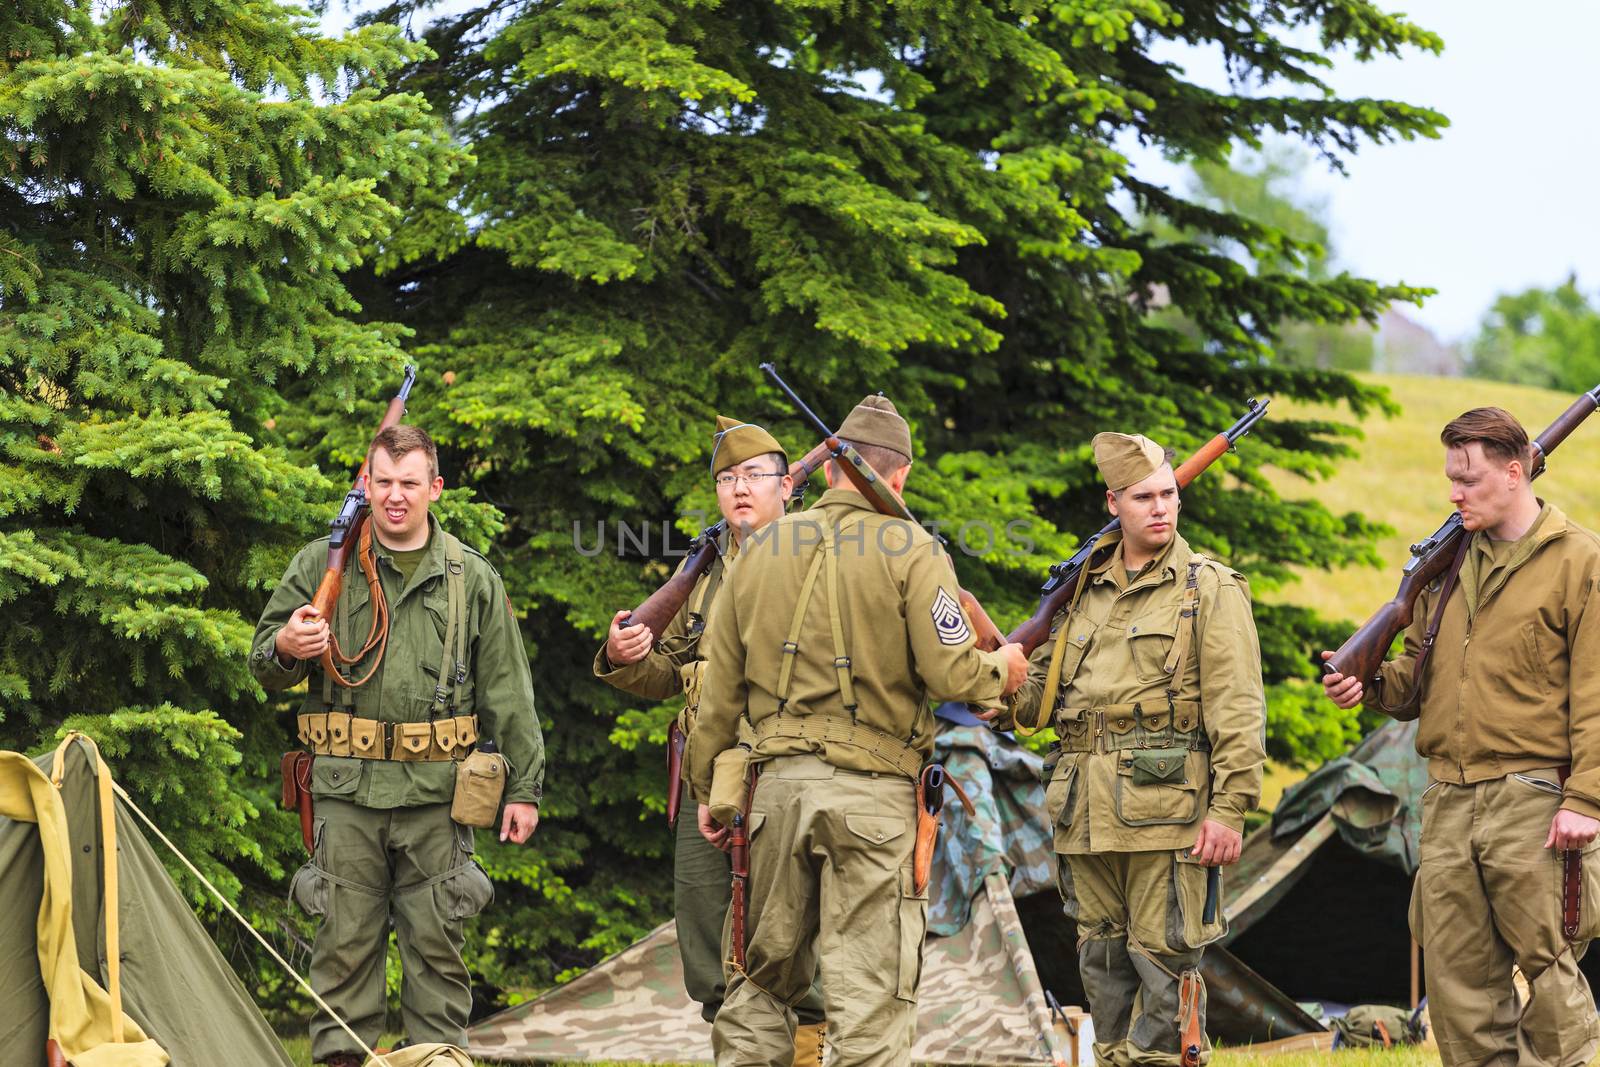 The Military Museum organized "Summer Skirmish" event where an unidentified soldier is seen in a historical Reenactment Battle. German and US soldiers in uniform.